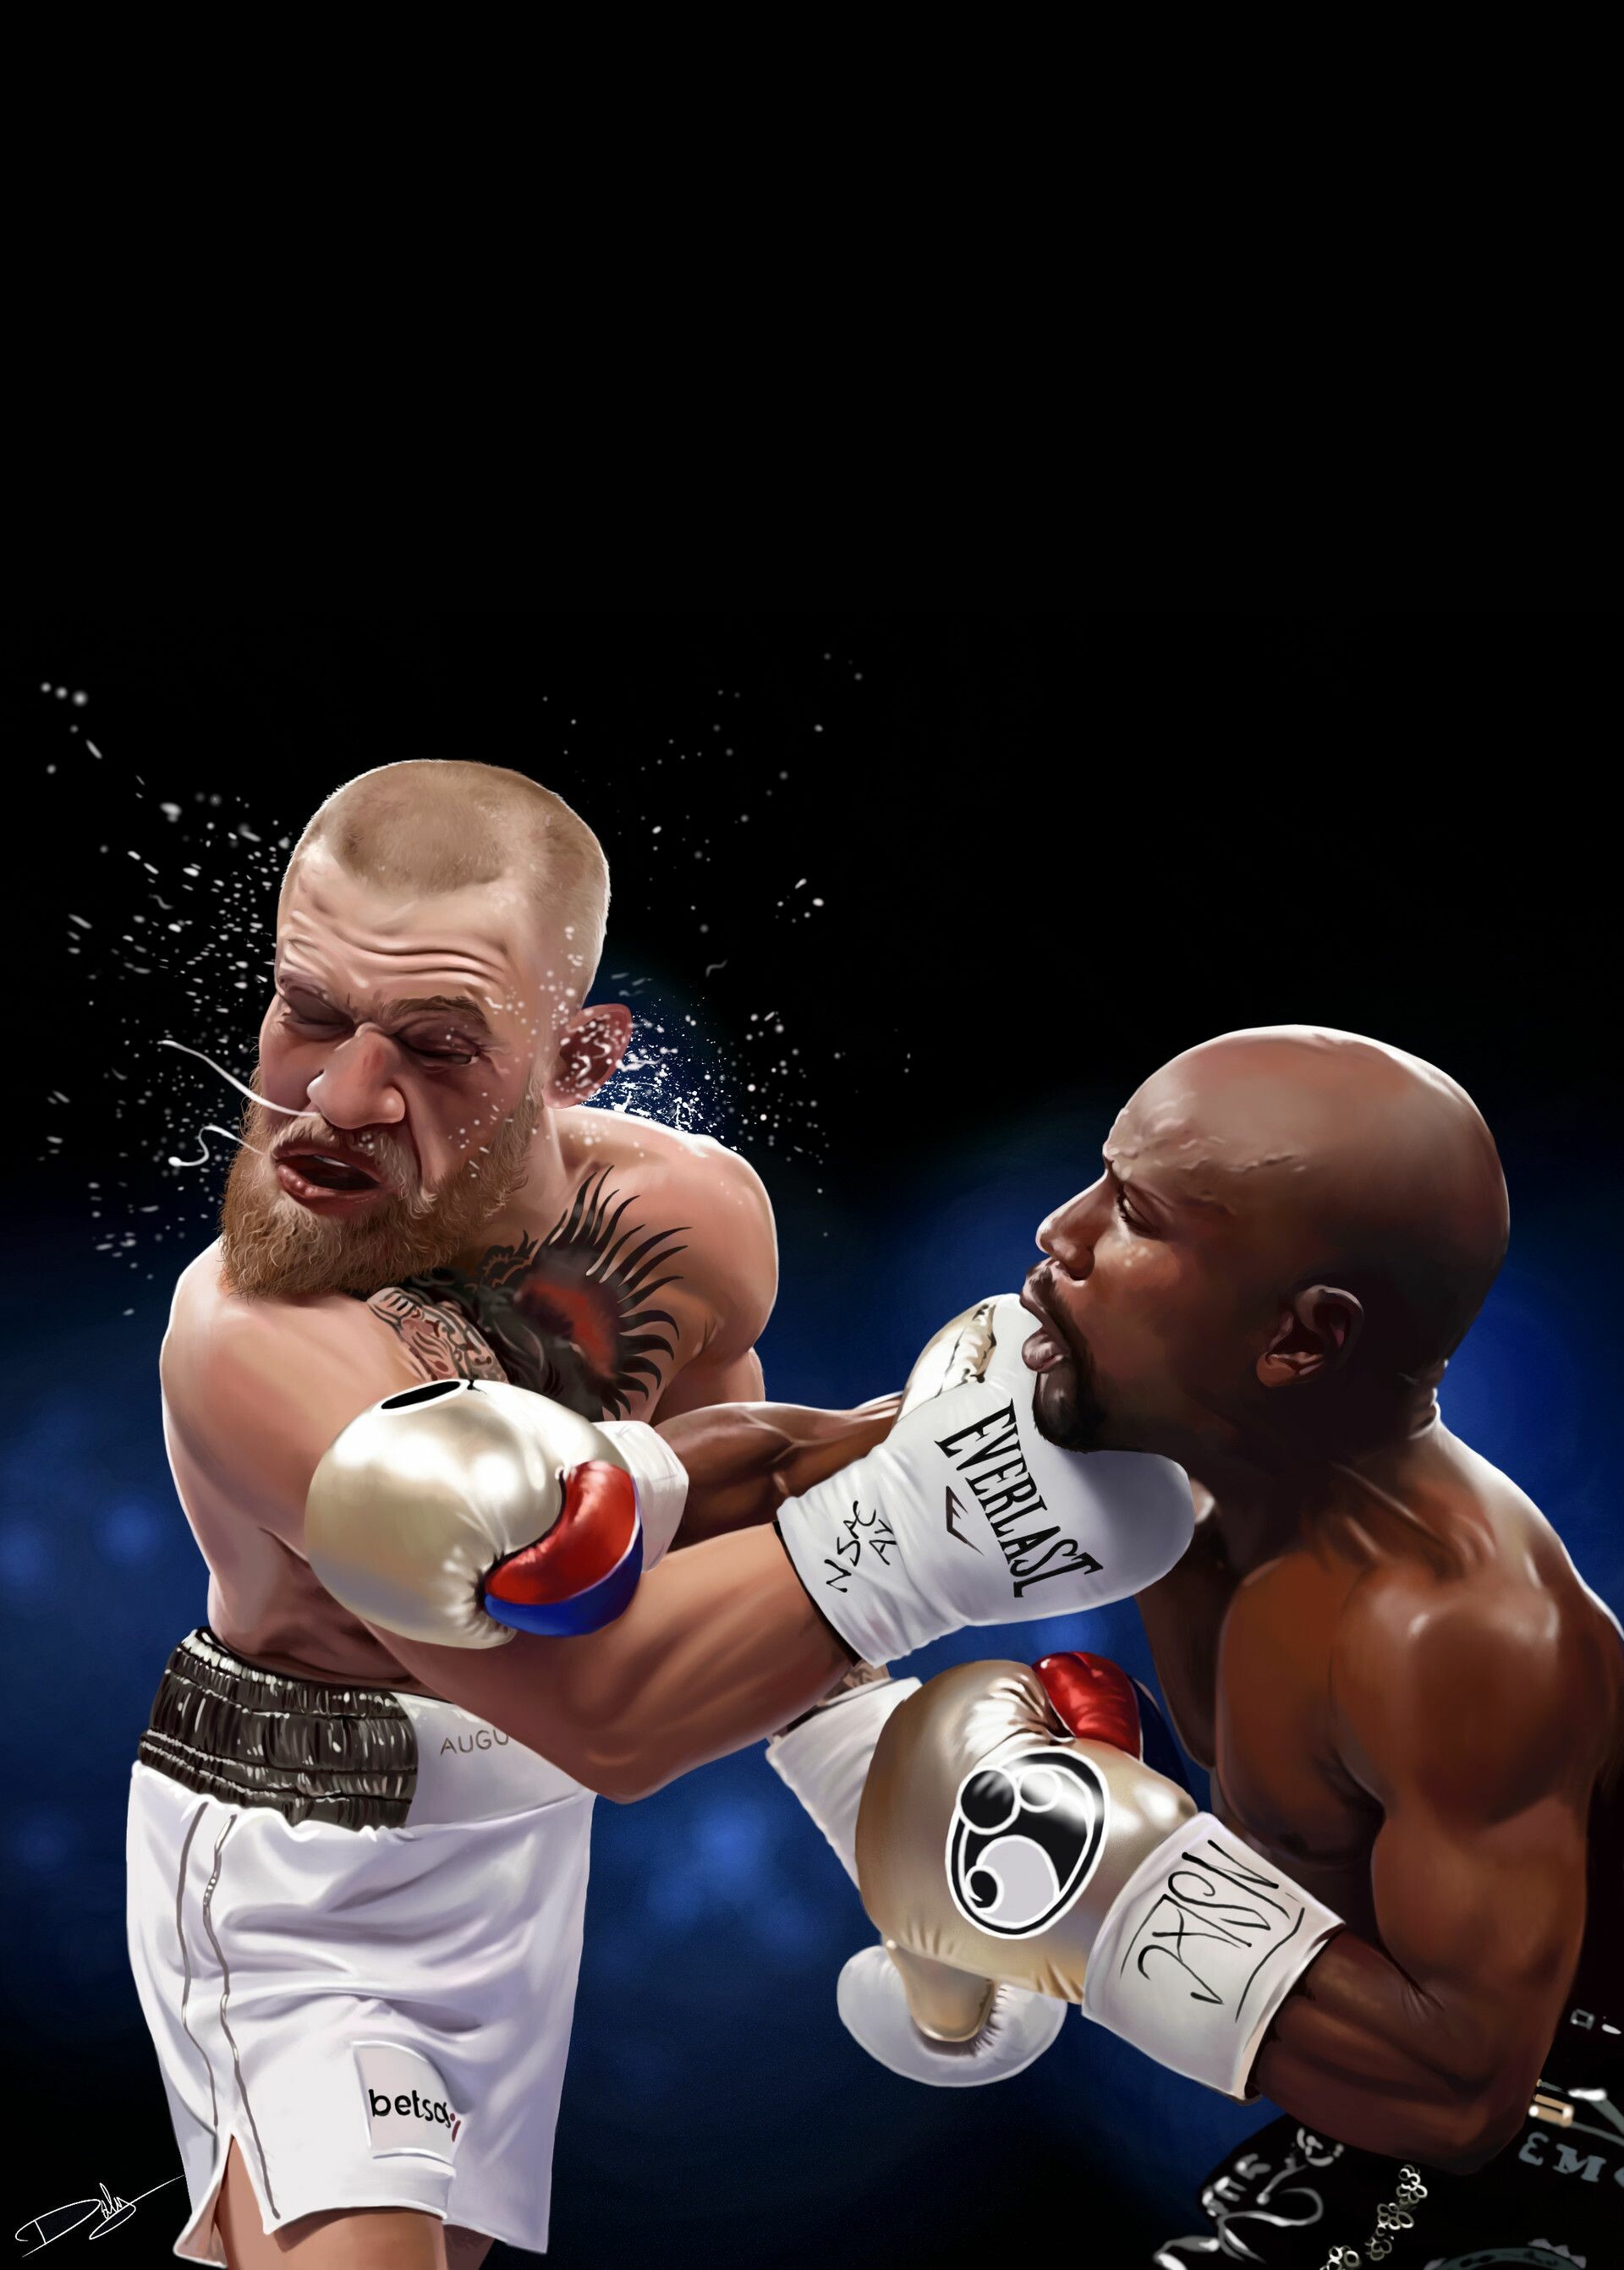 HD wallpaper, Boxing Vs Ufc, 1920X2690 Hd Phone, Iphone Hd Floyd Mayweather Background Image, Sporting Spectacle, Floyd Mayweather Vs Conor Mcgregor, Athletic Showdown